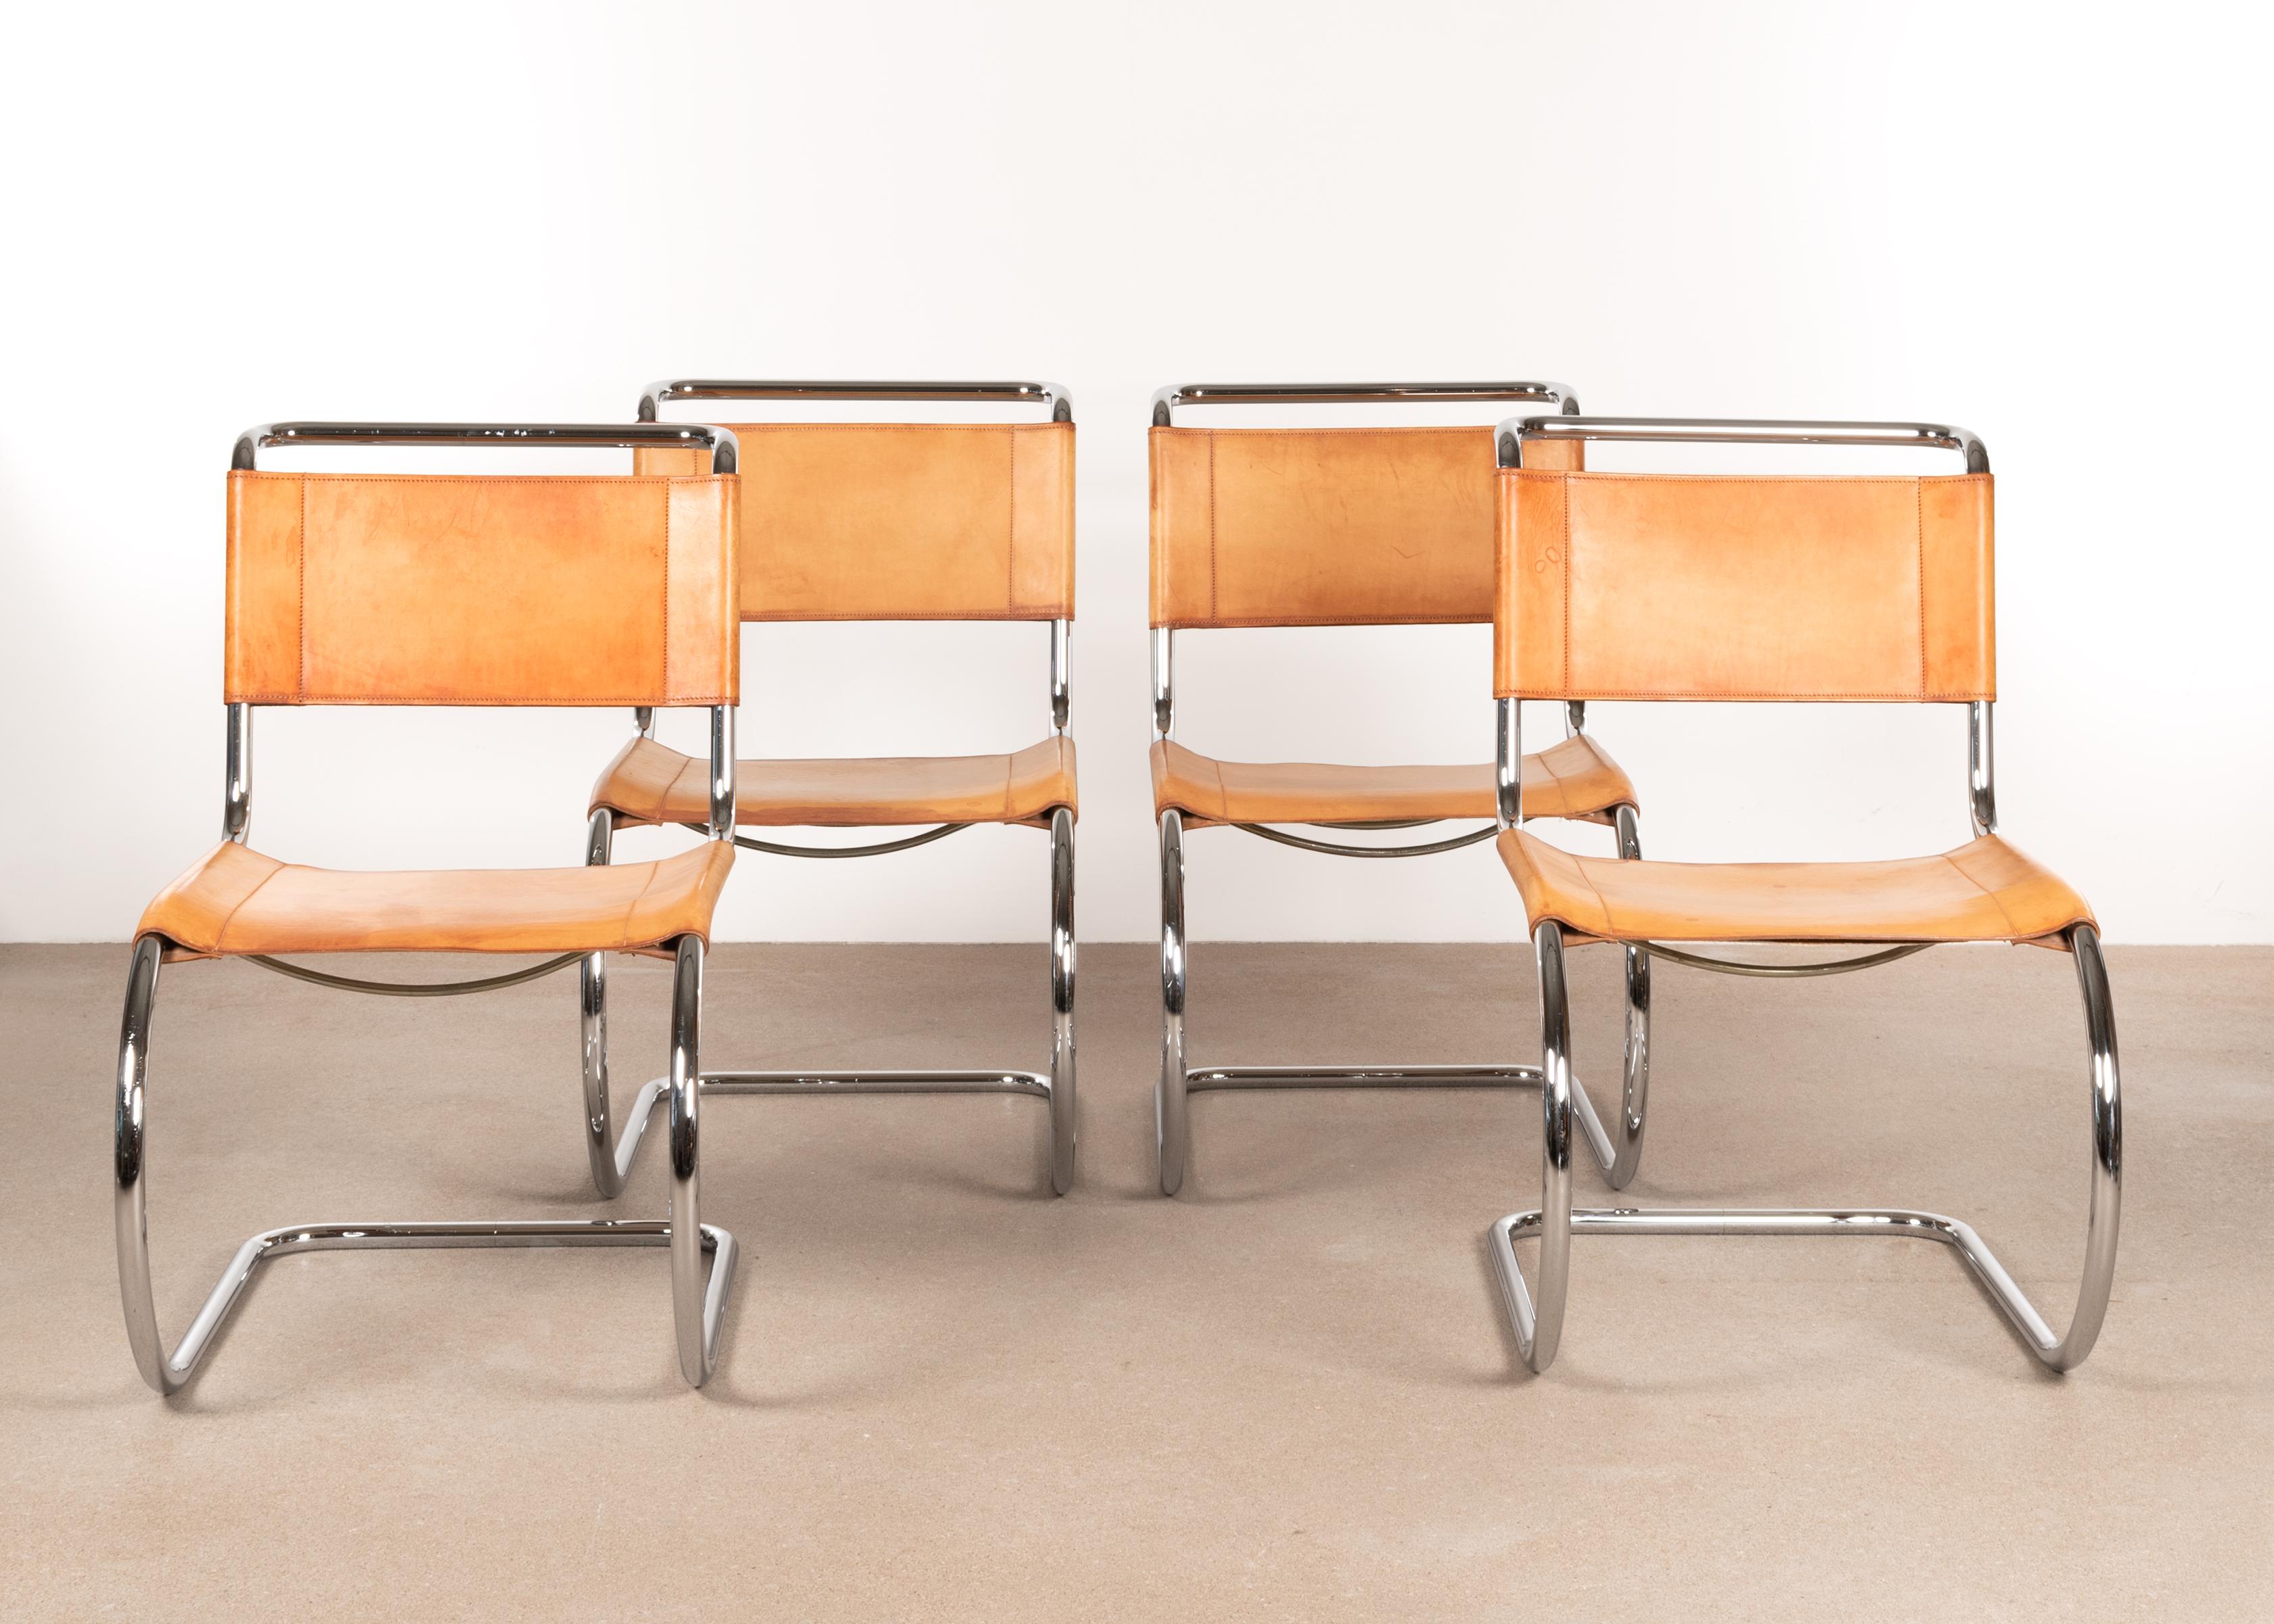 Beautiful set of MR 10 (256CS) Cantilever dining chairs designed by Mies van der Rohe for Thonet. Chrome plated steel tubular frames with cognac coloured seats and backrest of strong saddle leather. The leather is in very good condition, not dried